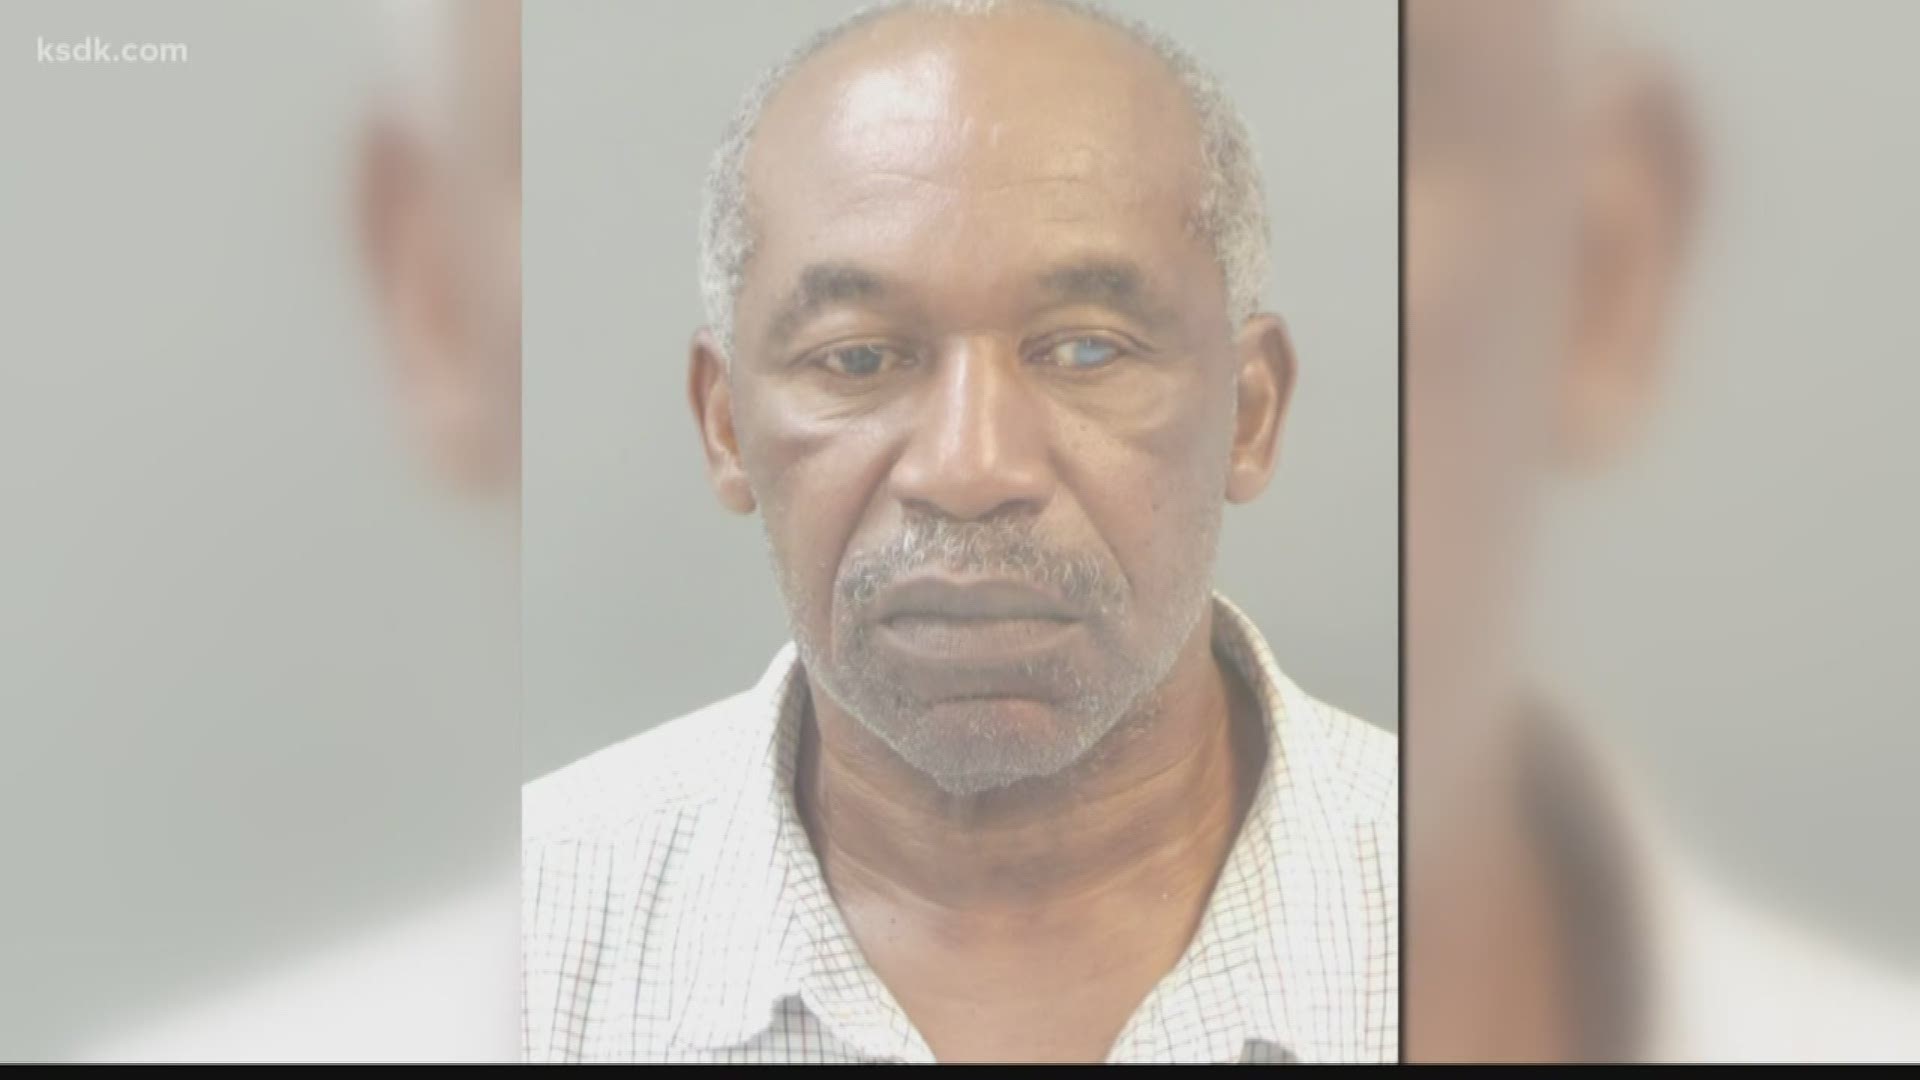 Willie Little, 63, was charged with two counts of first-degree murder and two counts of armed criminal action.